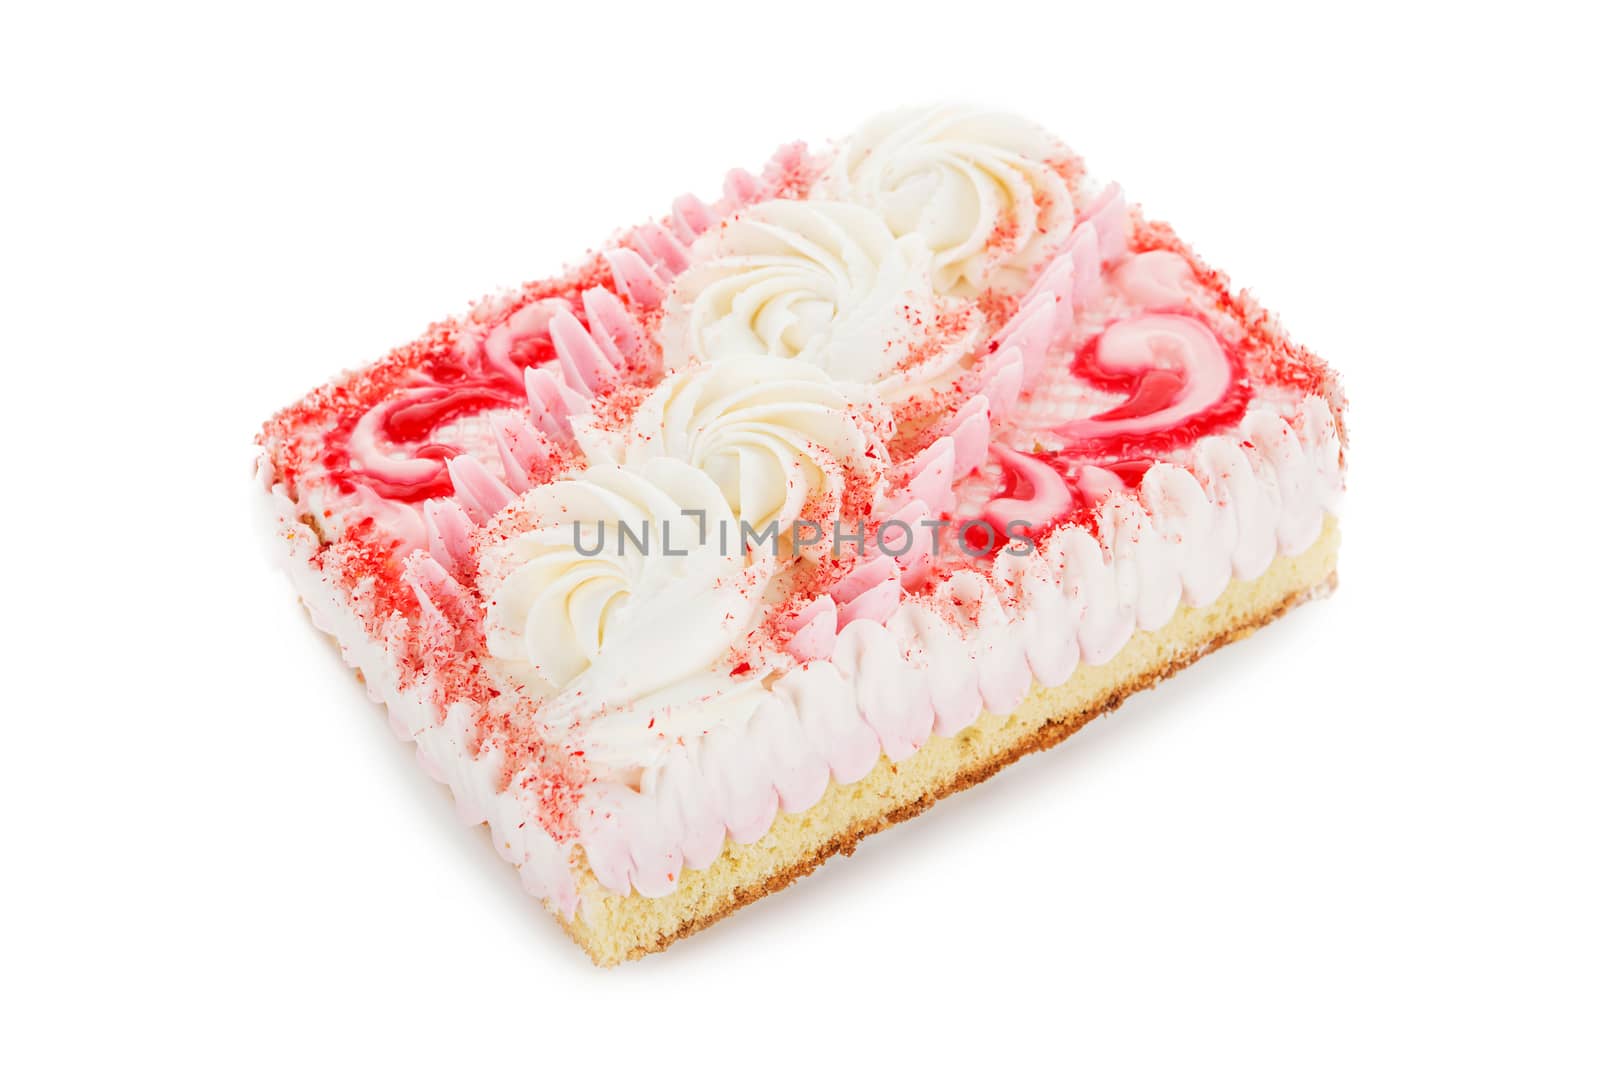 pink biscuit cake decorated with cream flowers isolated on white background